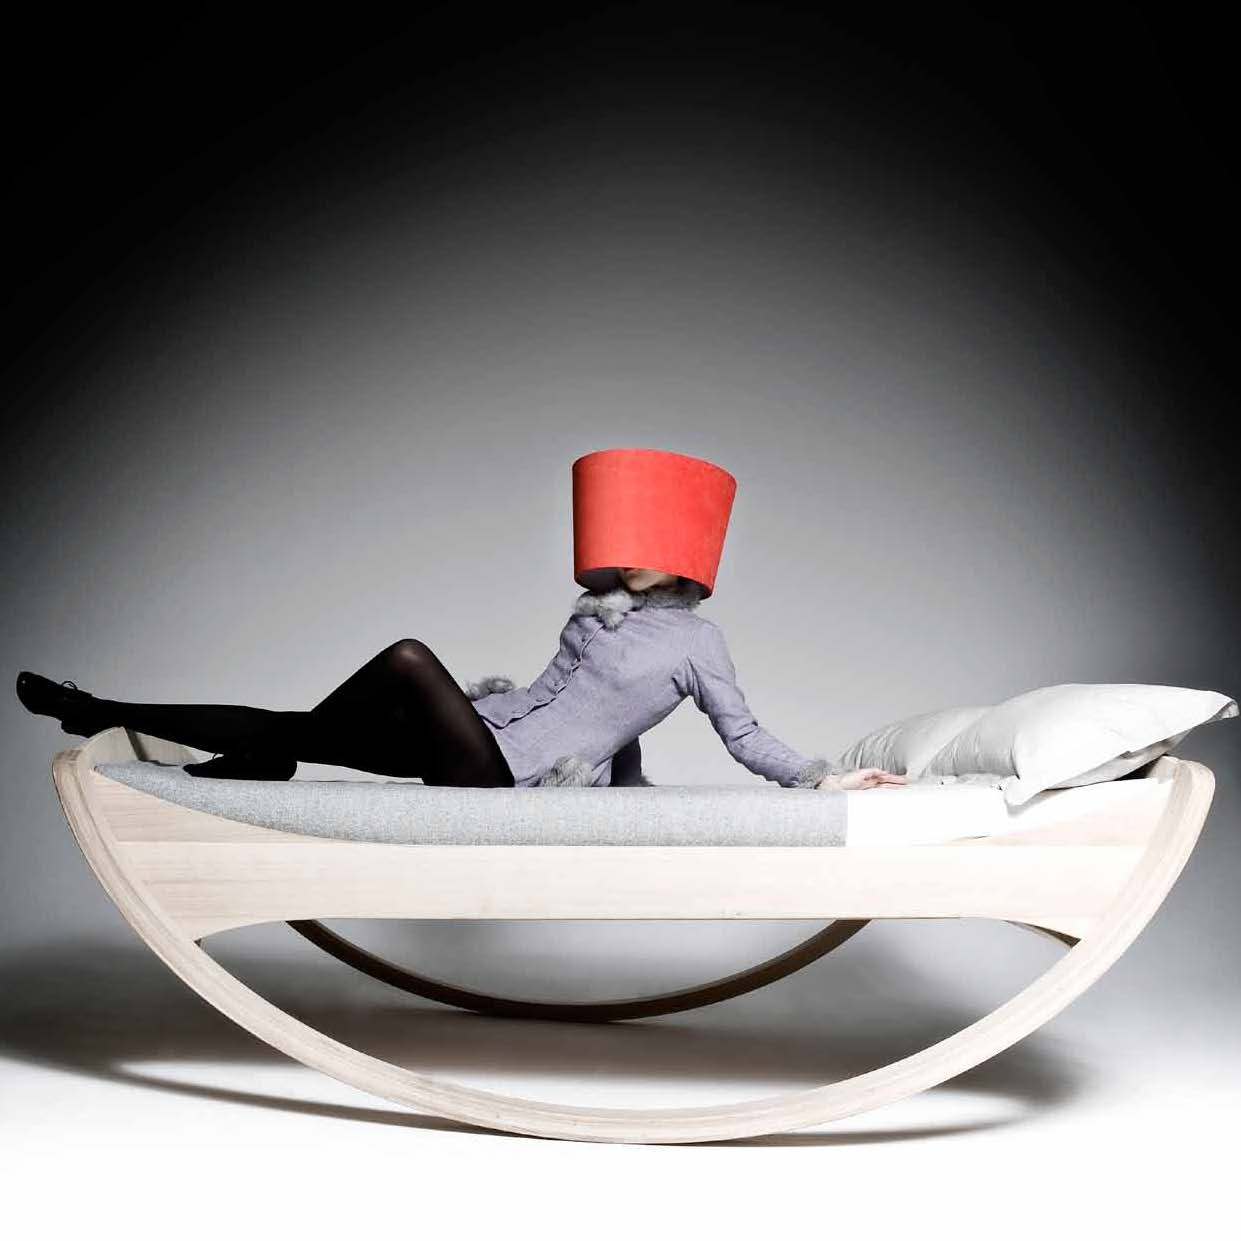 If It's Hip, It's Here: The Private Cloud Rocking Bed Evolves ...